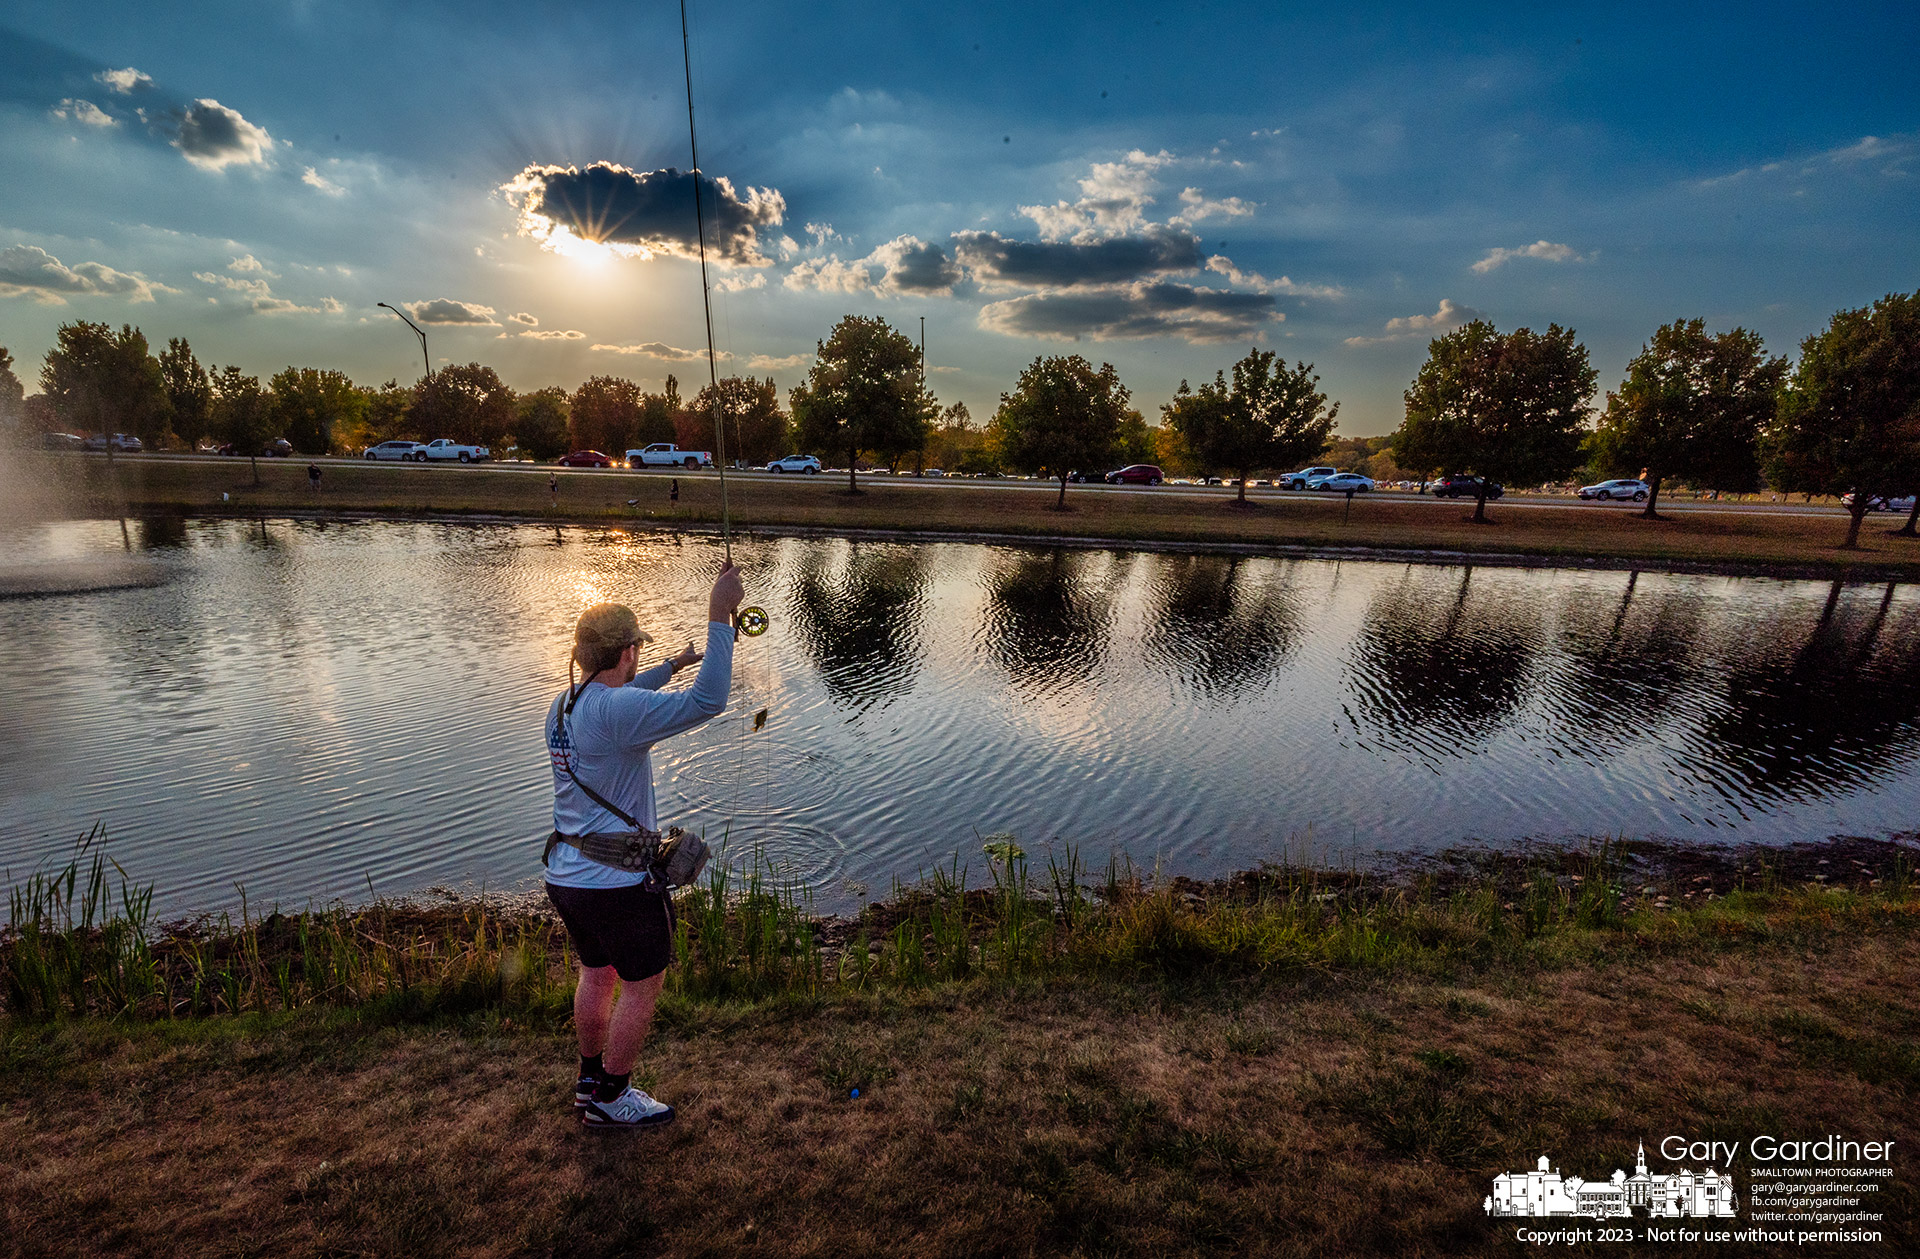 A fly fisherman retrieves a small fish from the community center holding pond where late afternoon fishing is popular. My Final Photo for October 3, 2023.